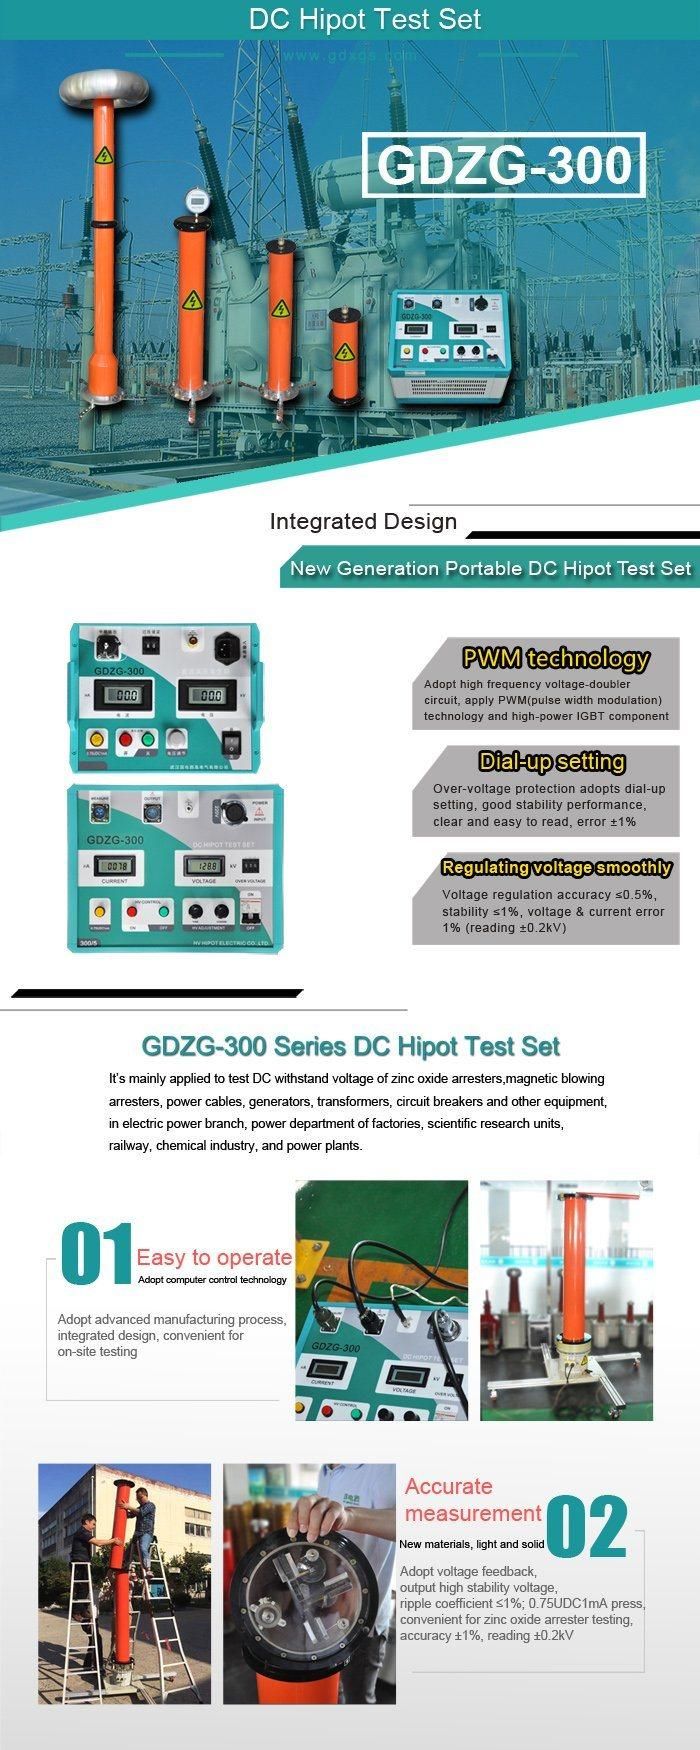 DC Hipot Test Set for Power Cables, Generators and Transformers